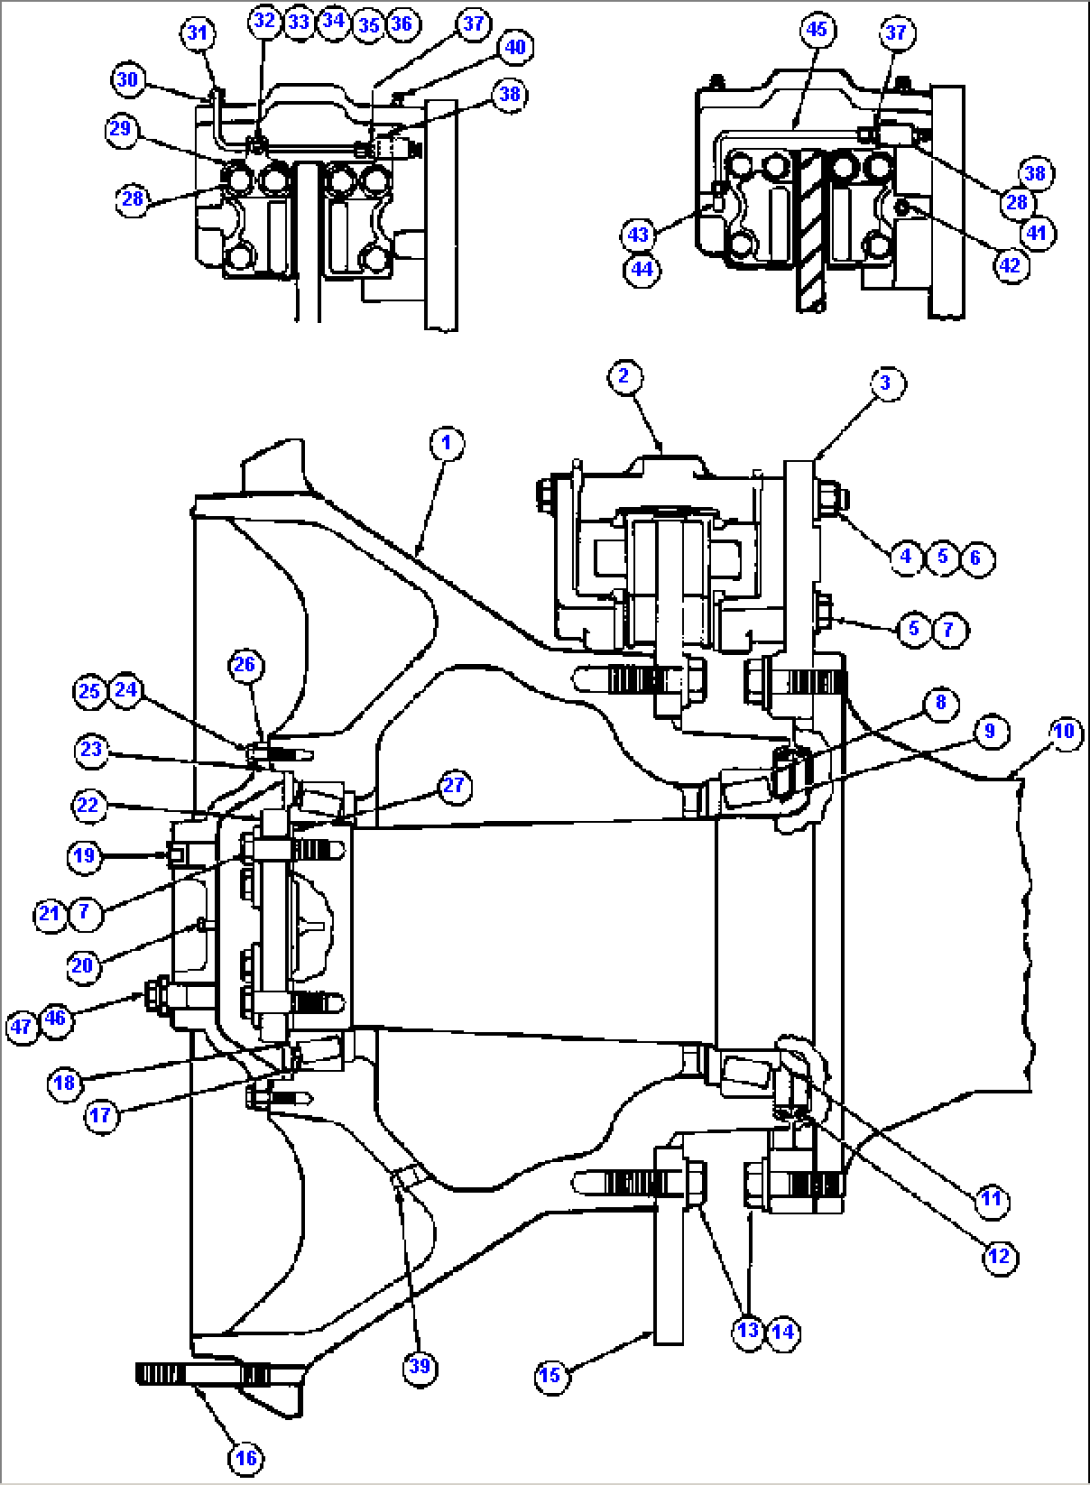 ENGINE OIL PRESSURE PIPING